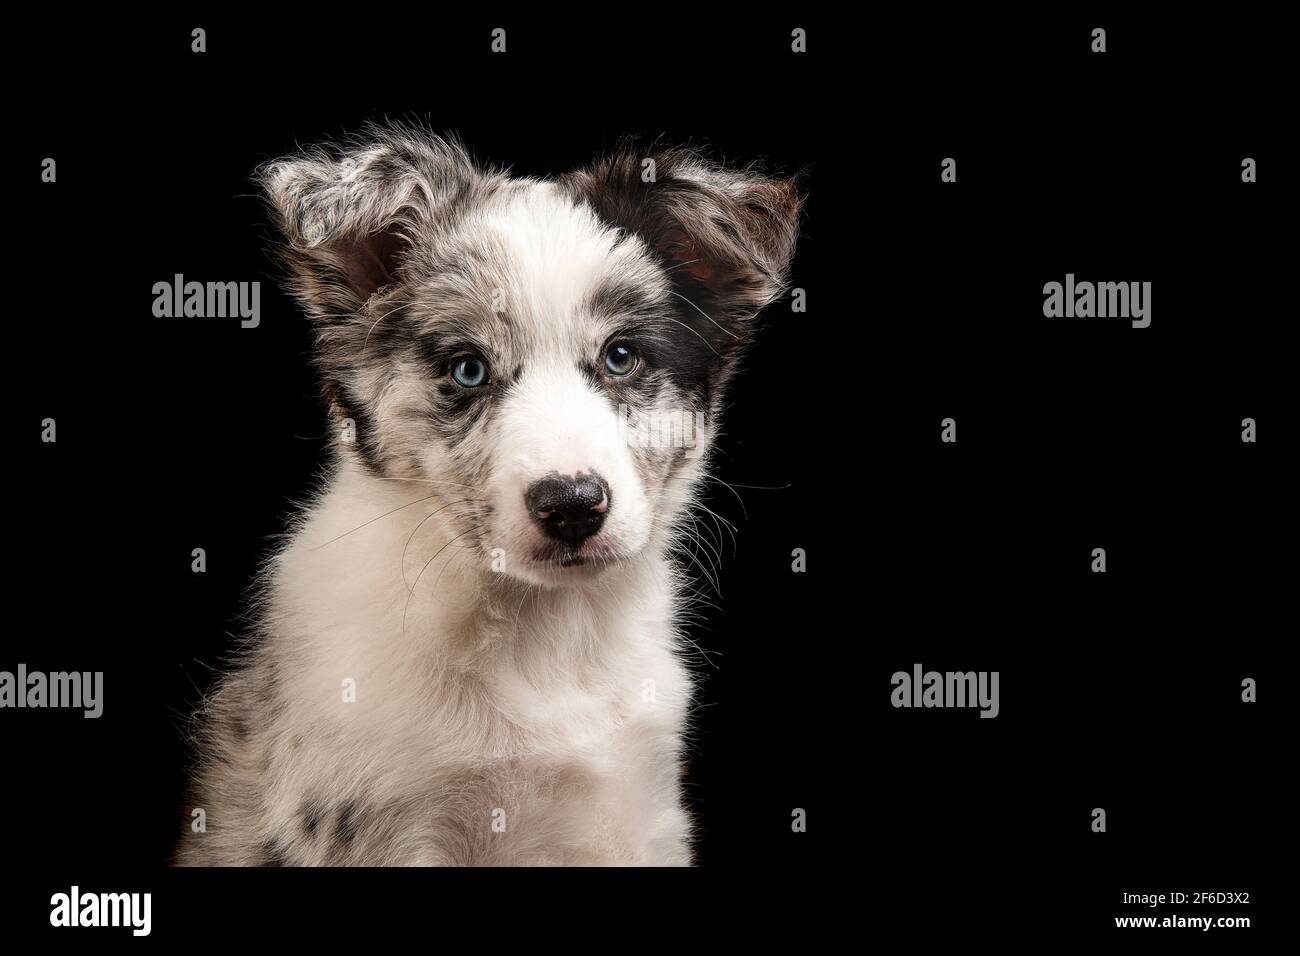 Portrait of a young border collie puppy looking at the camera on a black background Stock Photo